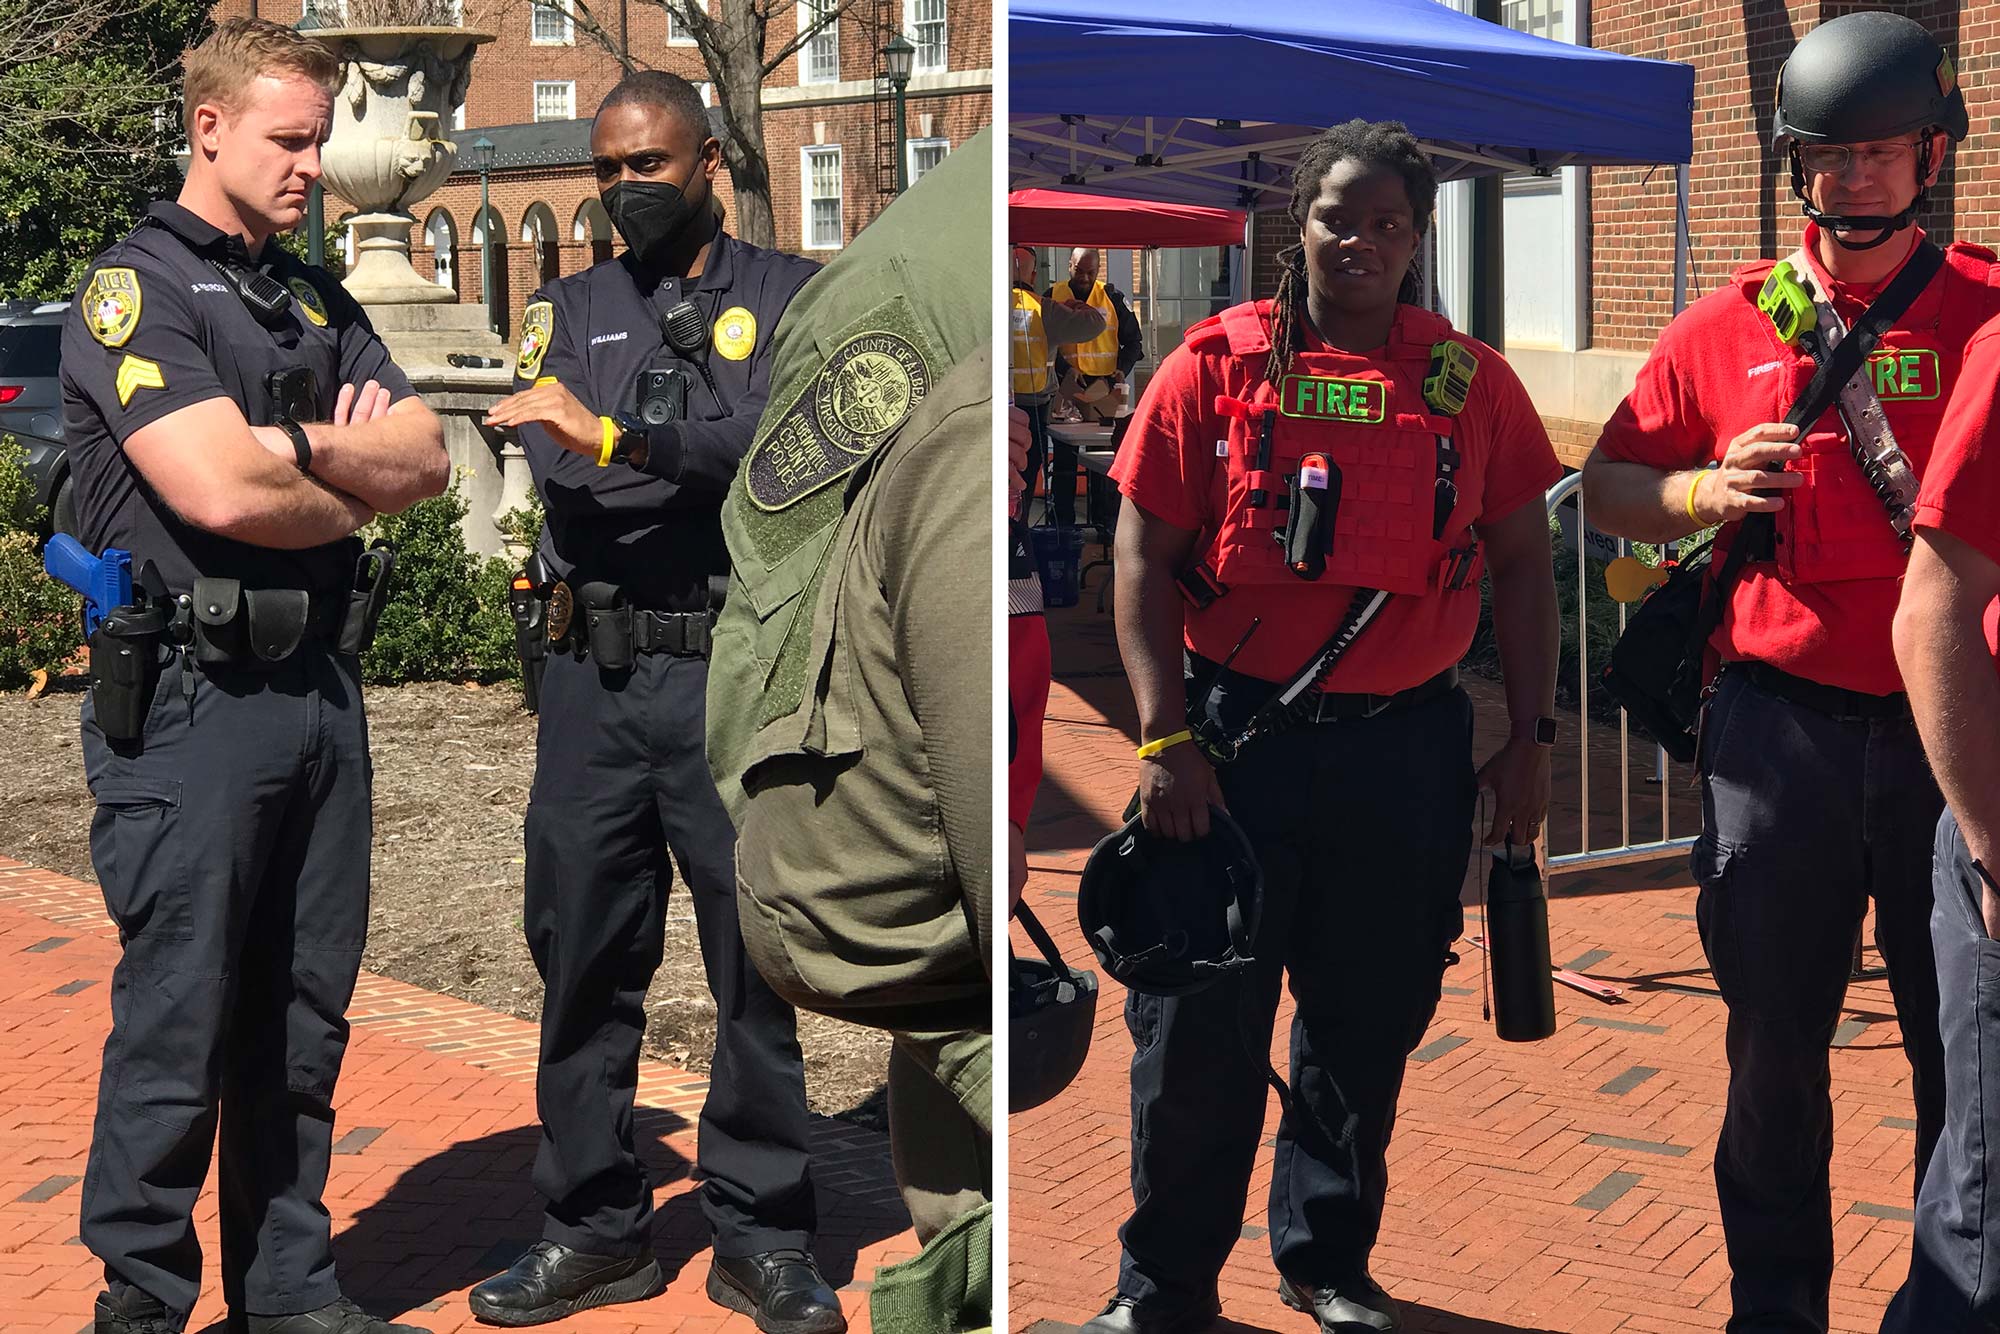 Left, two uniformed police offers converse. Right, two uniformed firefighters wait for an exercise to begin.